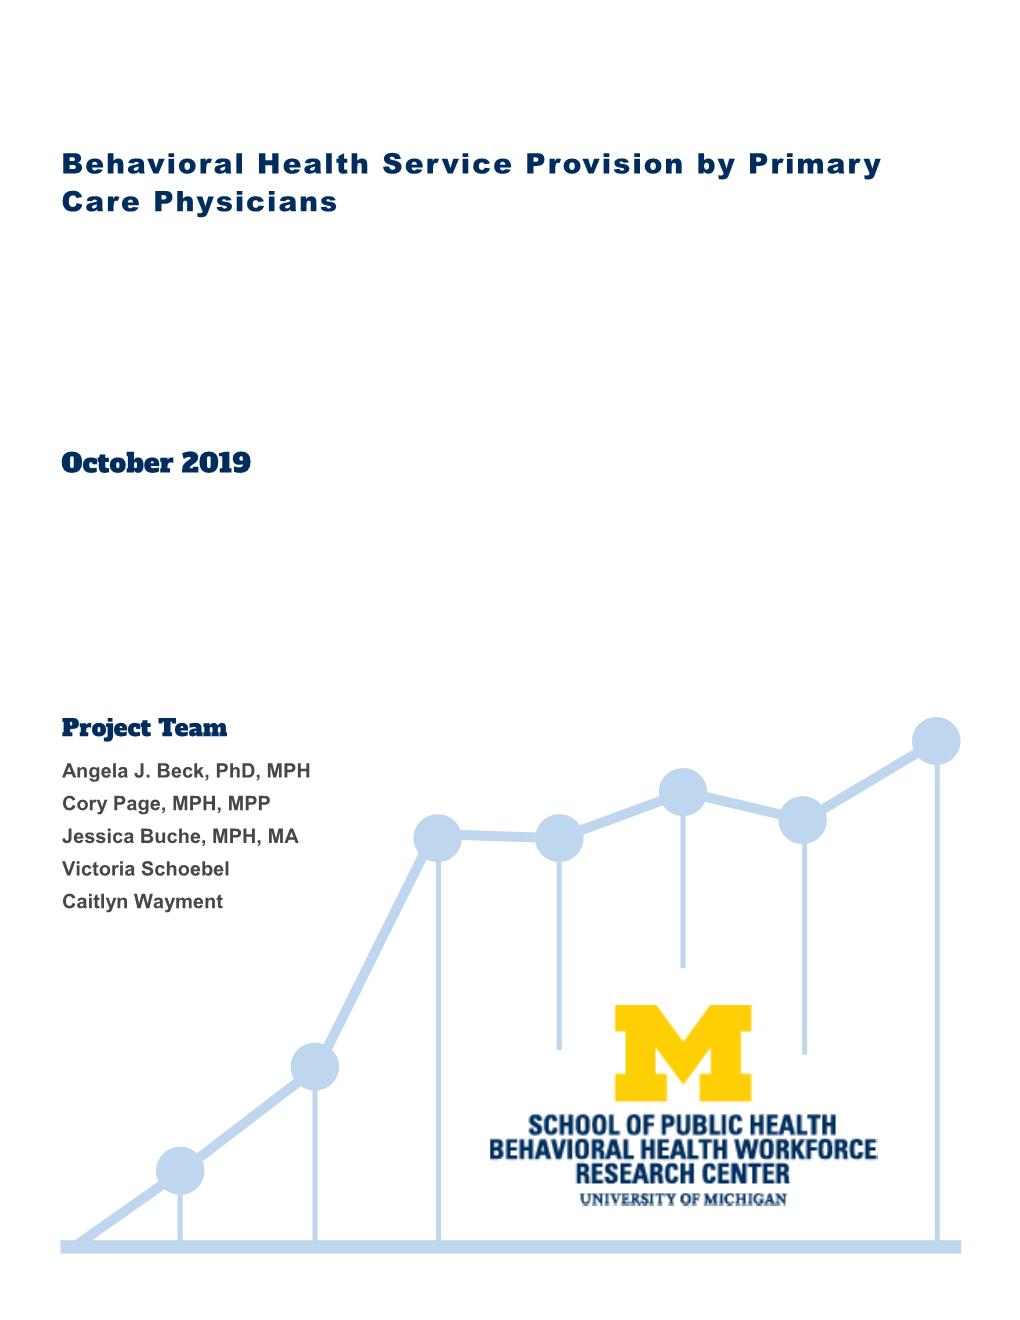 Behavioral Health Service Provision by Primary Care Physicians